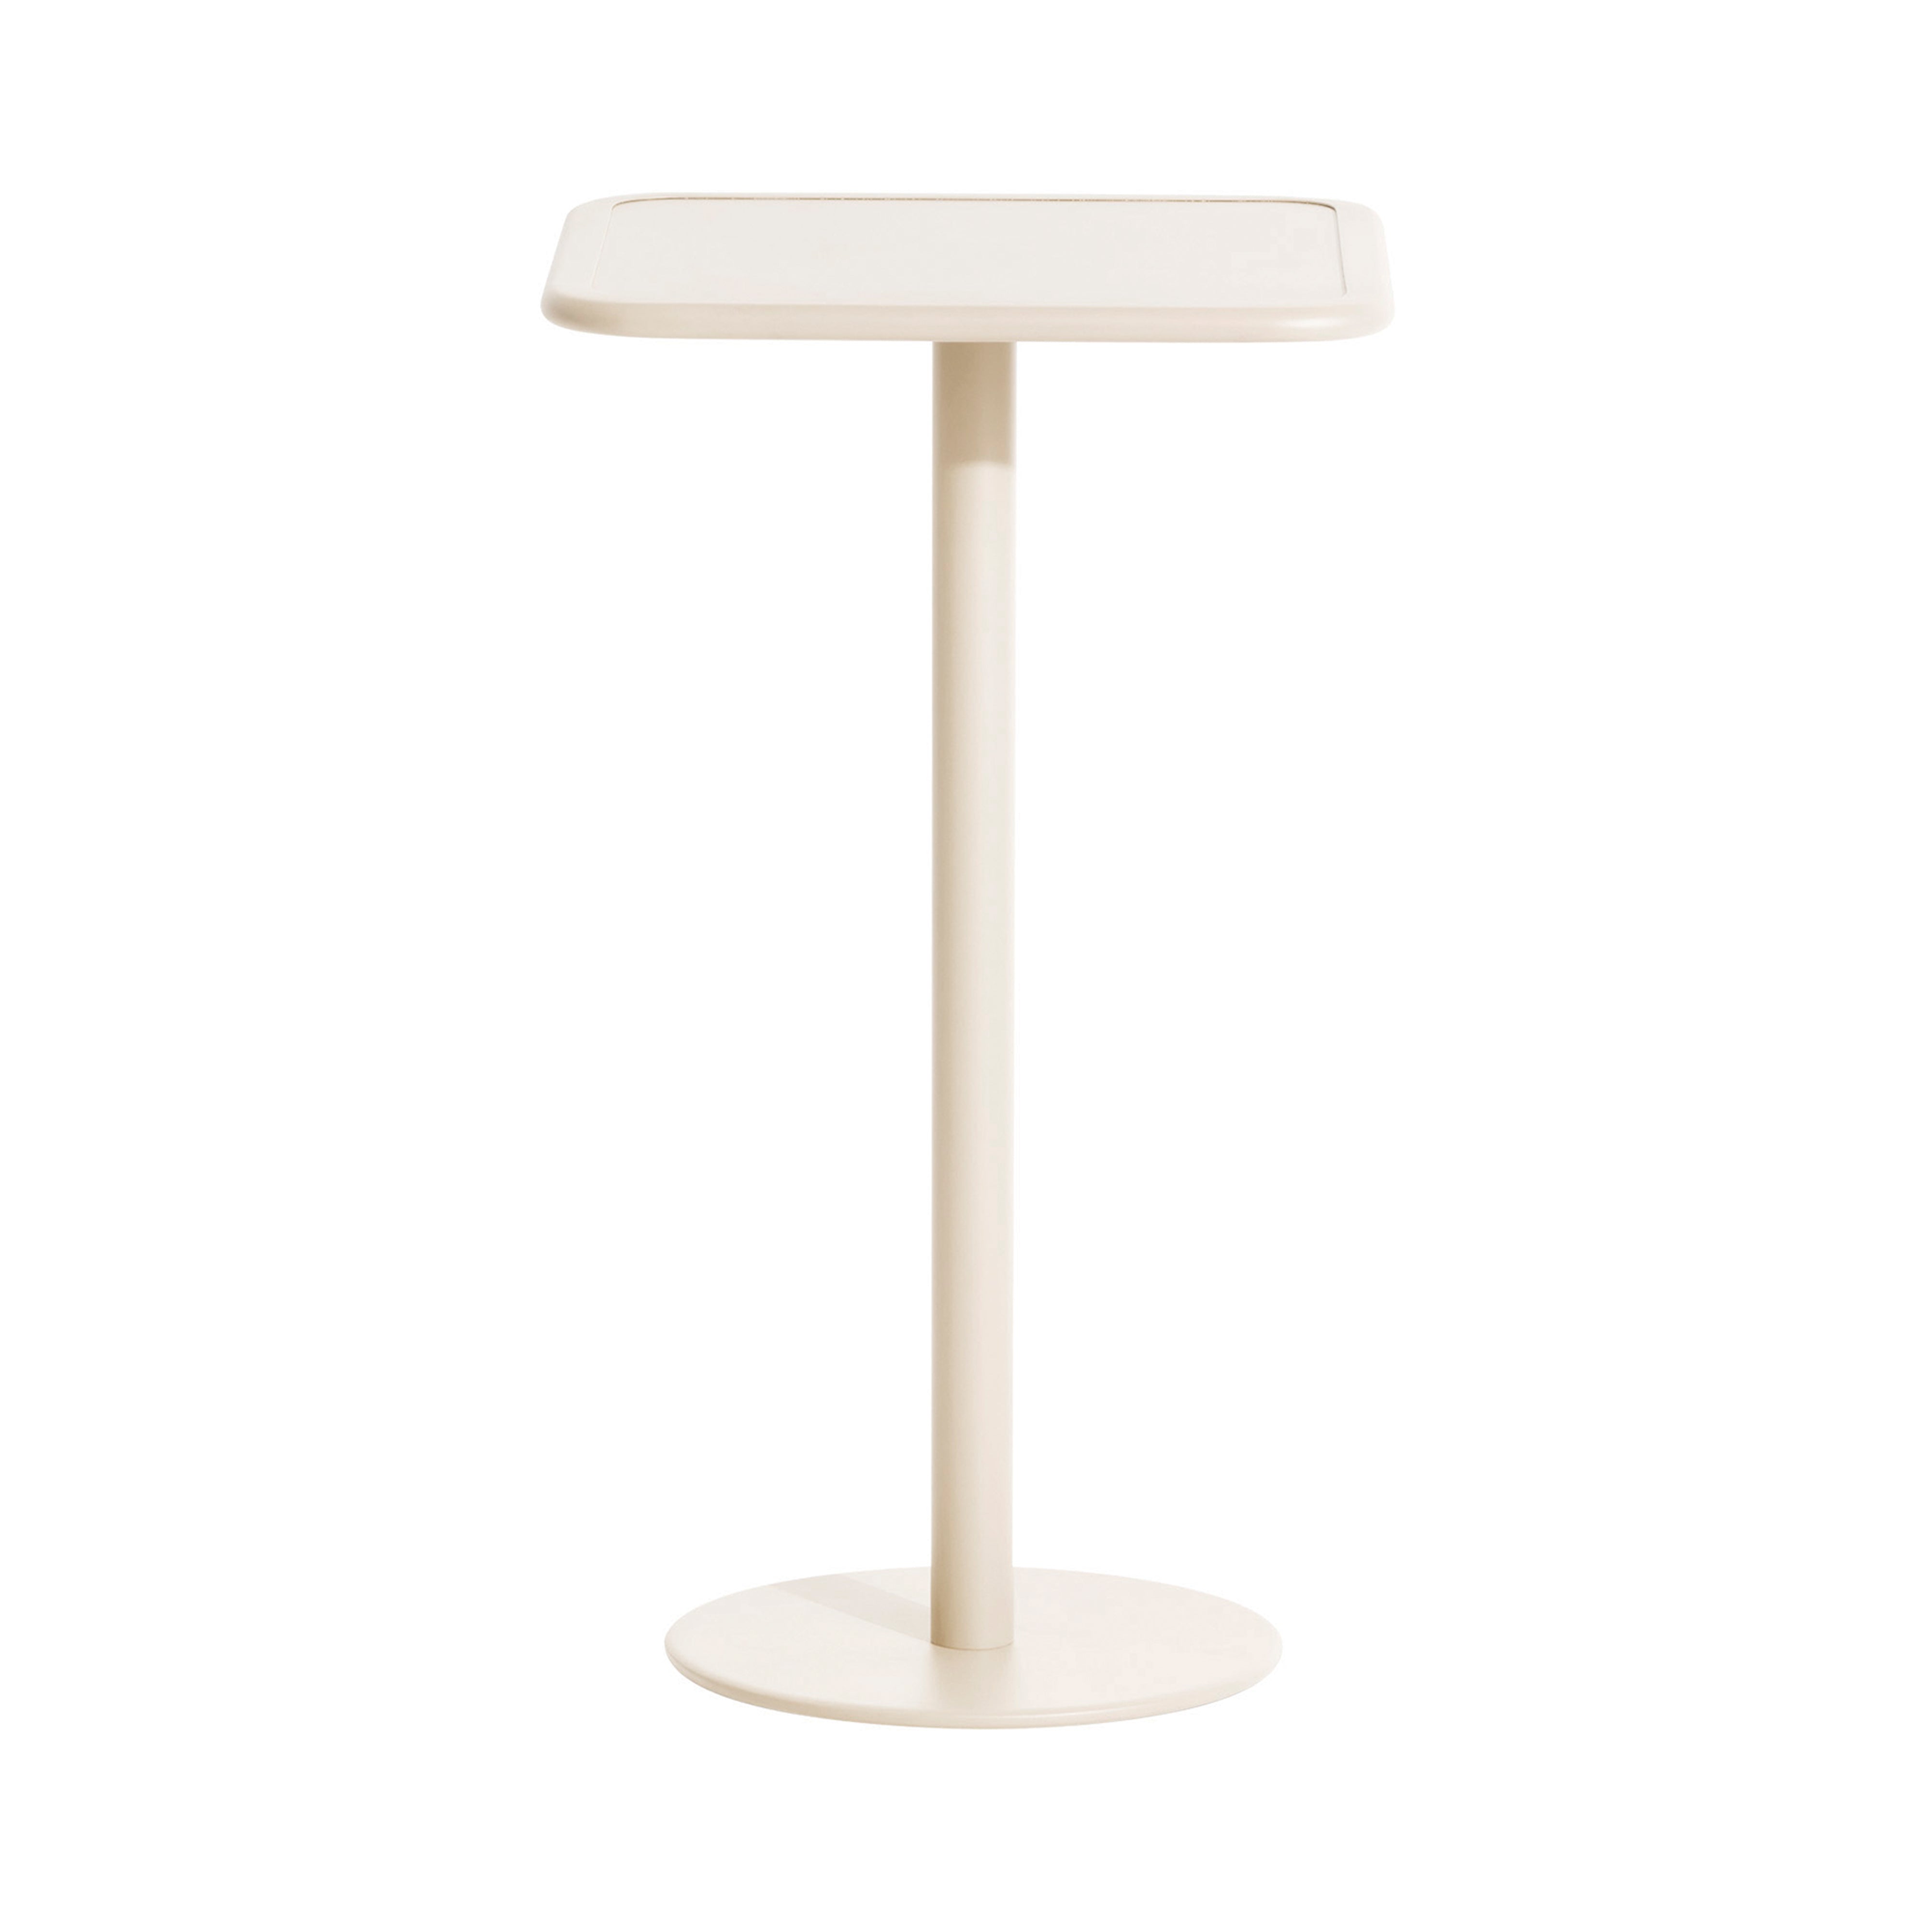 Week-End Bistro High Table: Square + Ivory